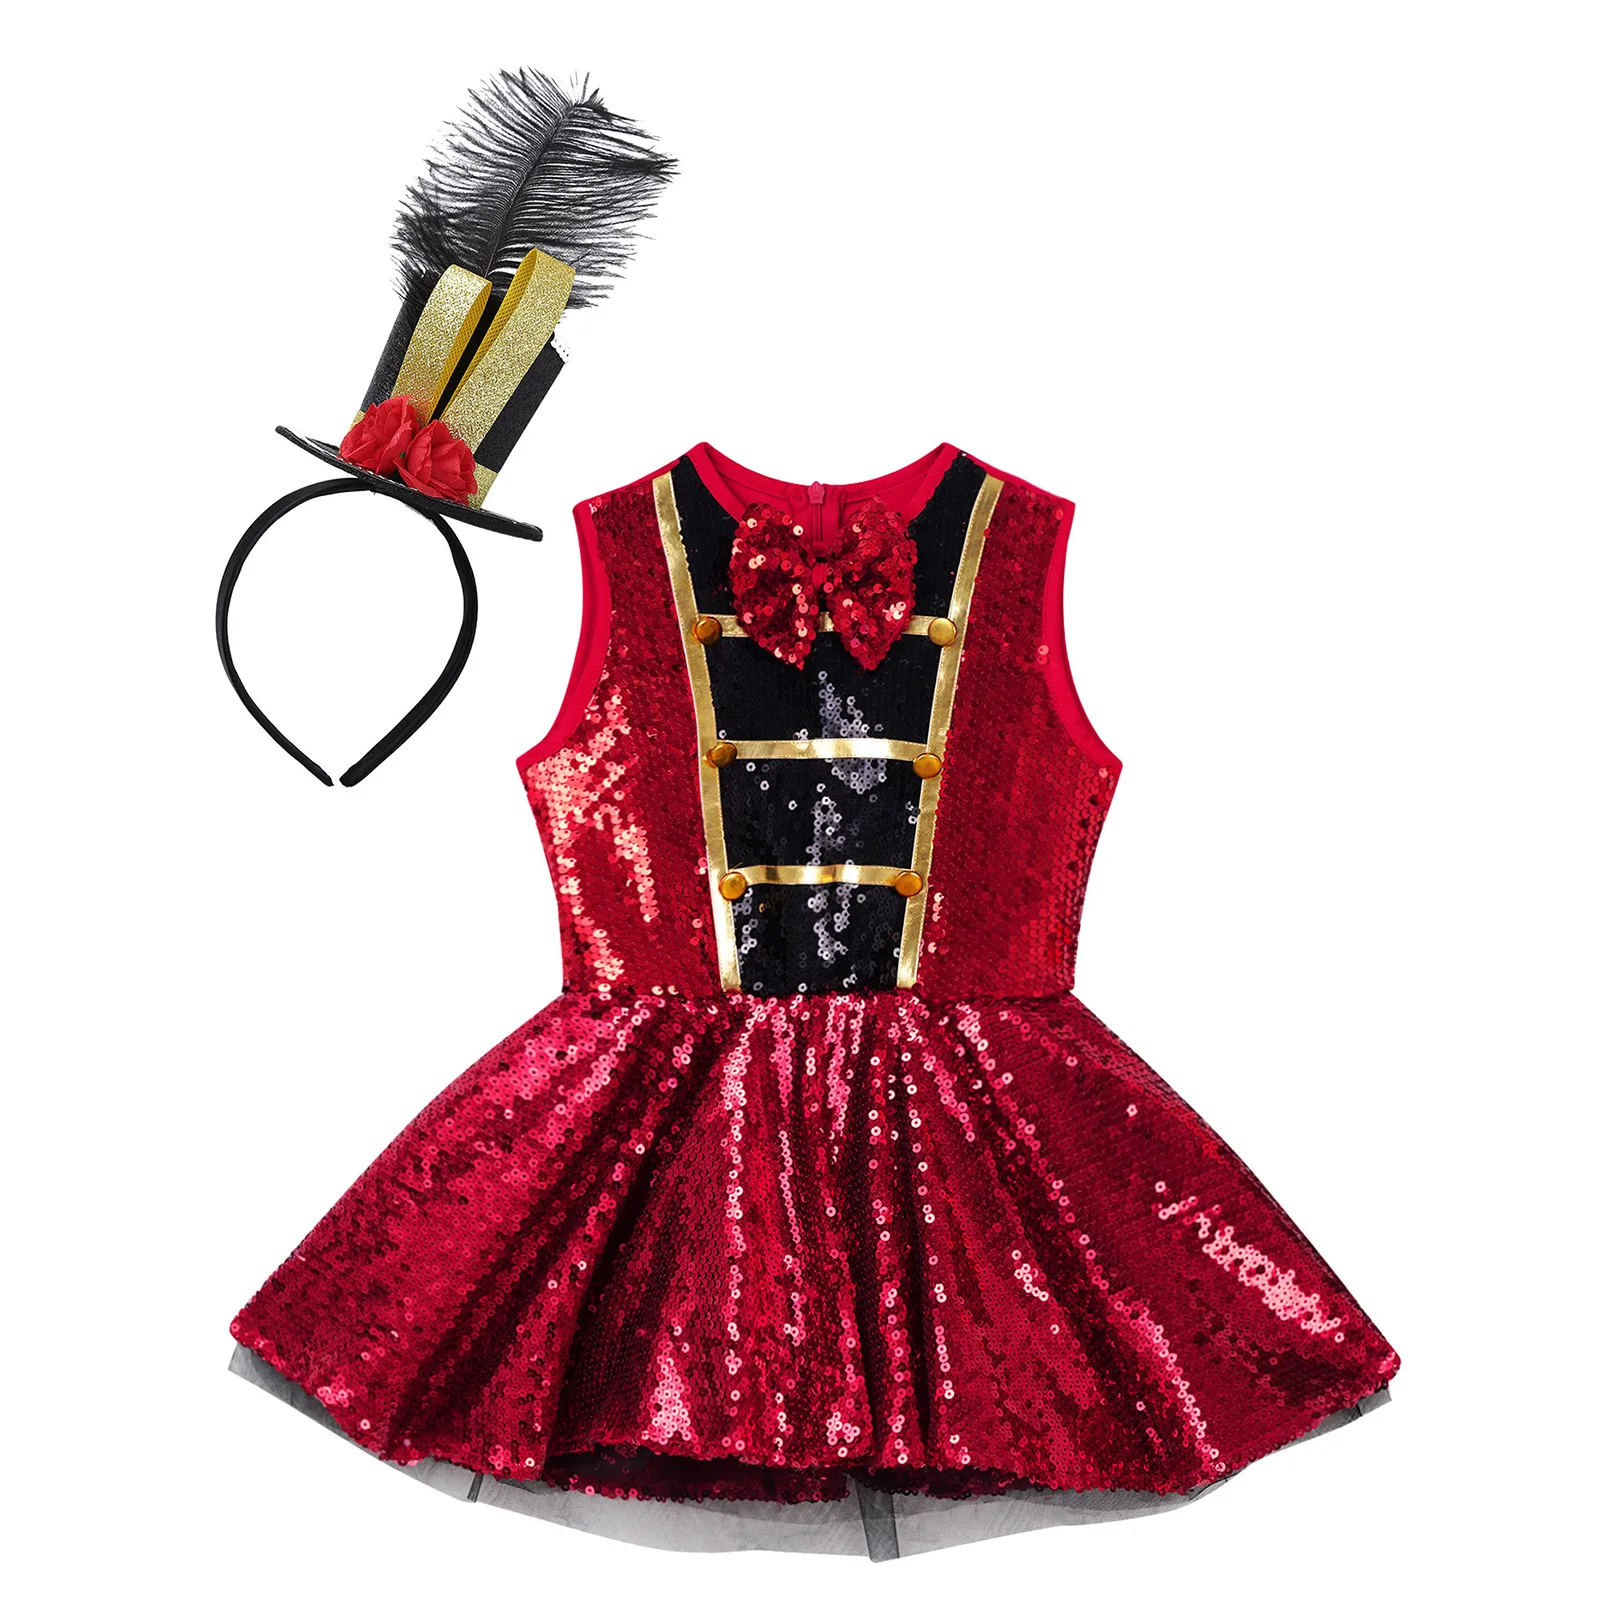 4-16 Years Girls Circus Ringmaster Costumes Shiny Sequins Leotard Dress with Feather Hat for Halloween Carnival Party Dress Up pirate costume women